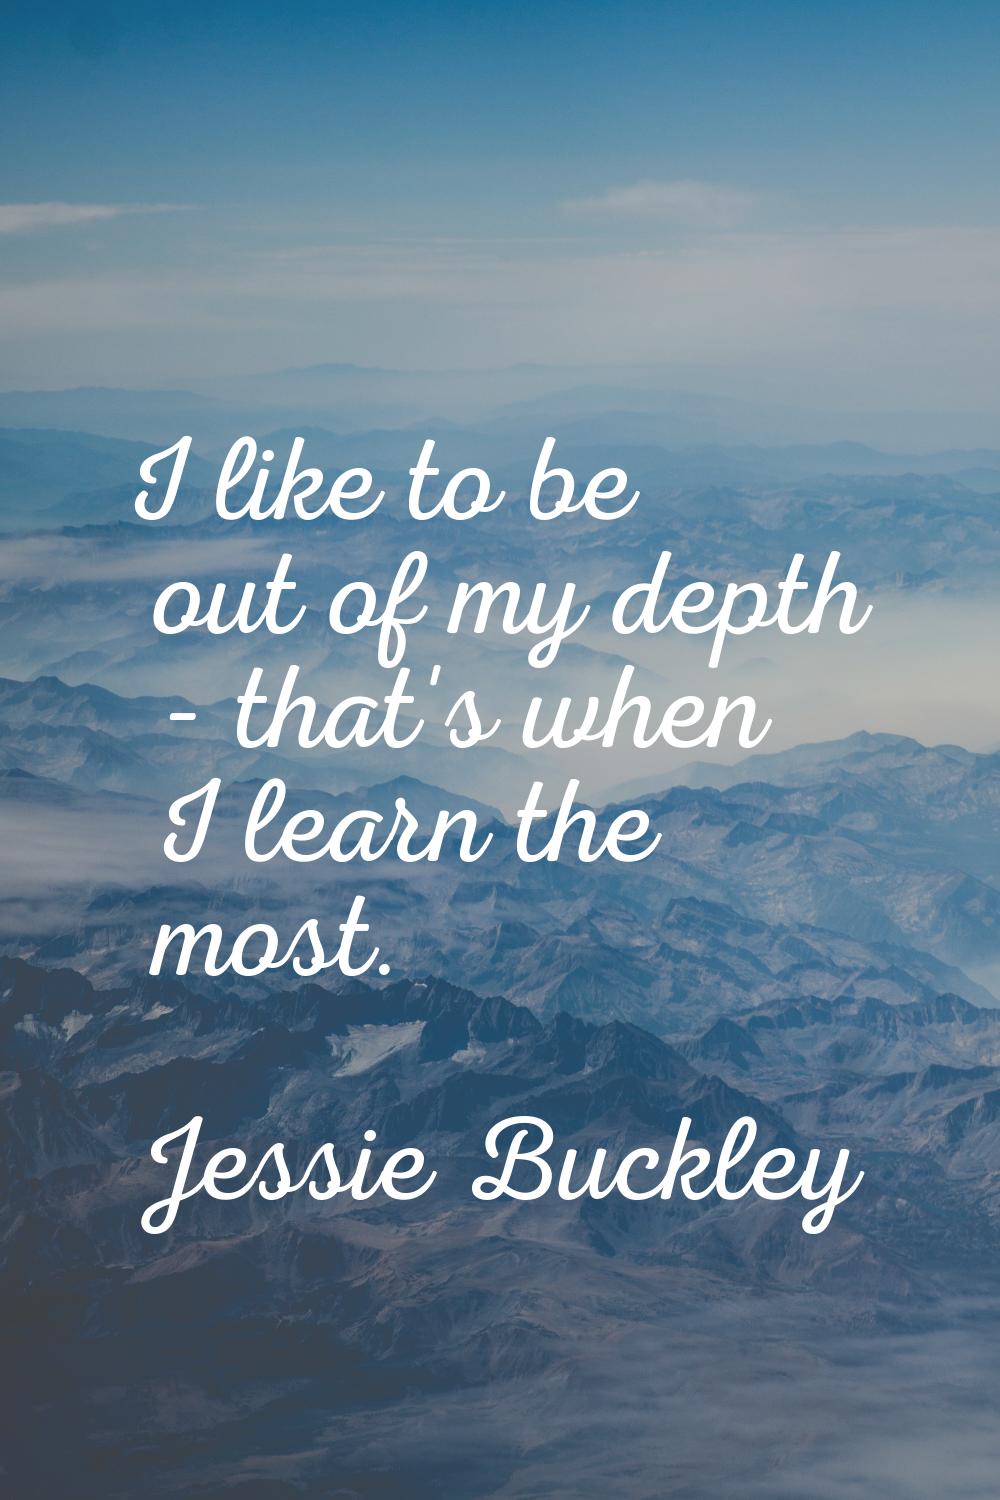 I like to be out of my depth - that's when I learn the most.